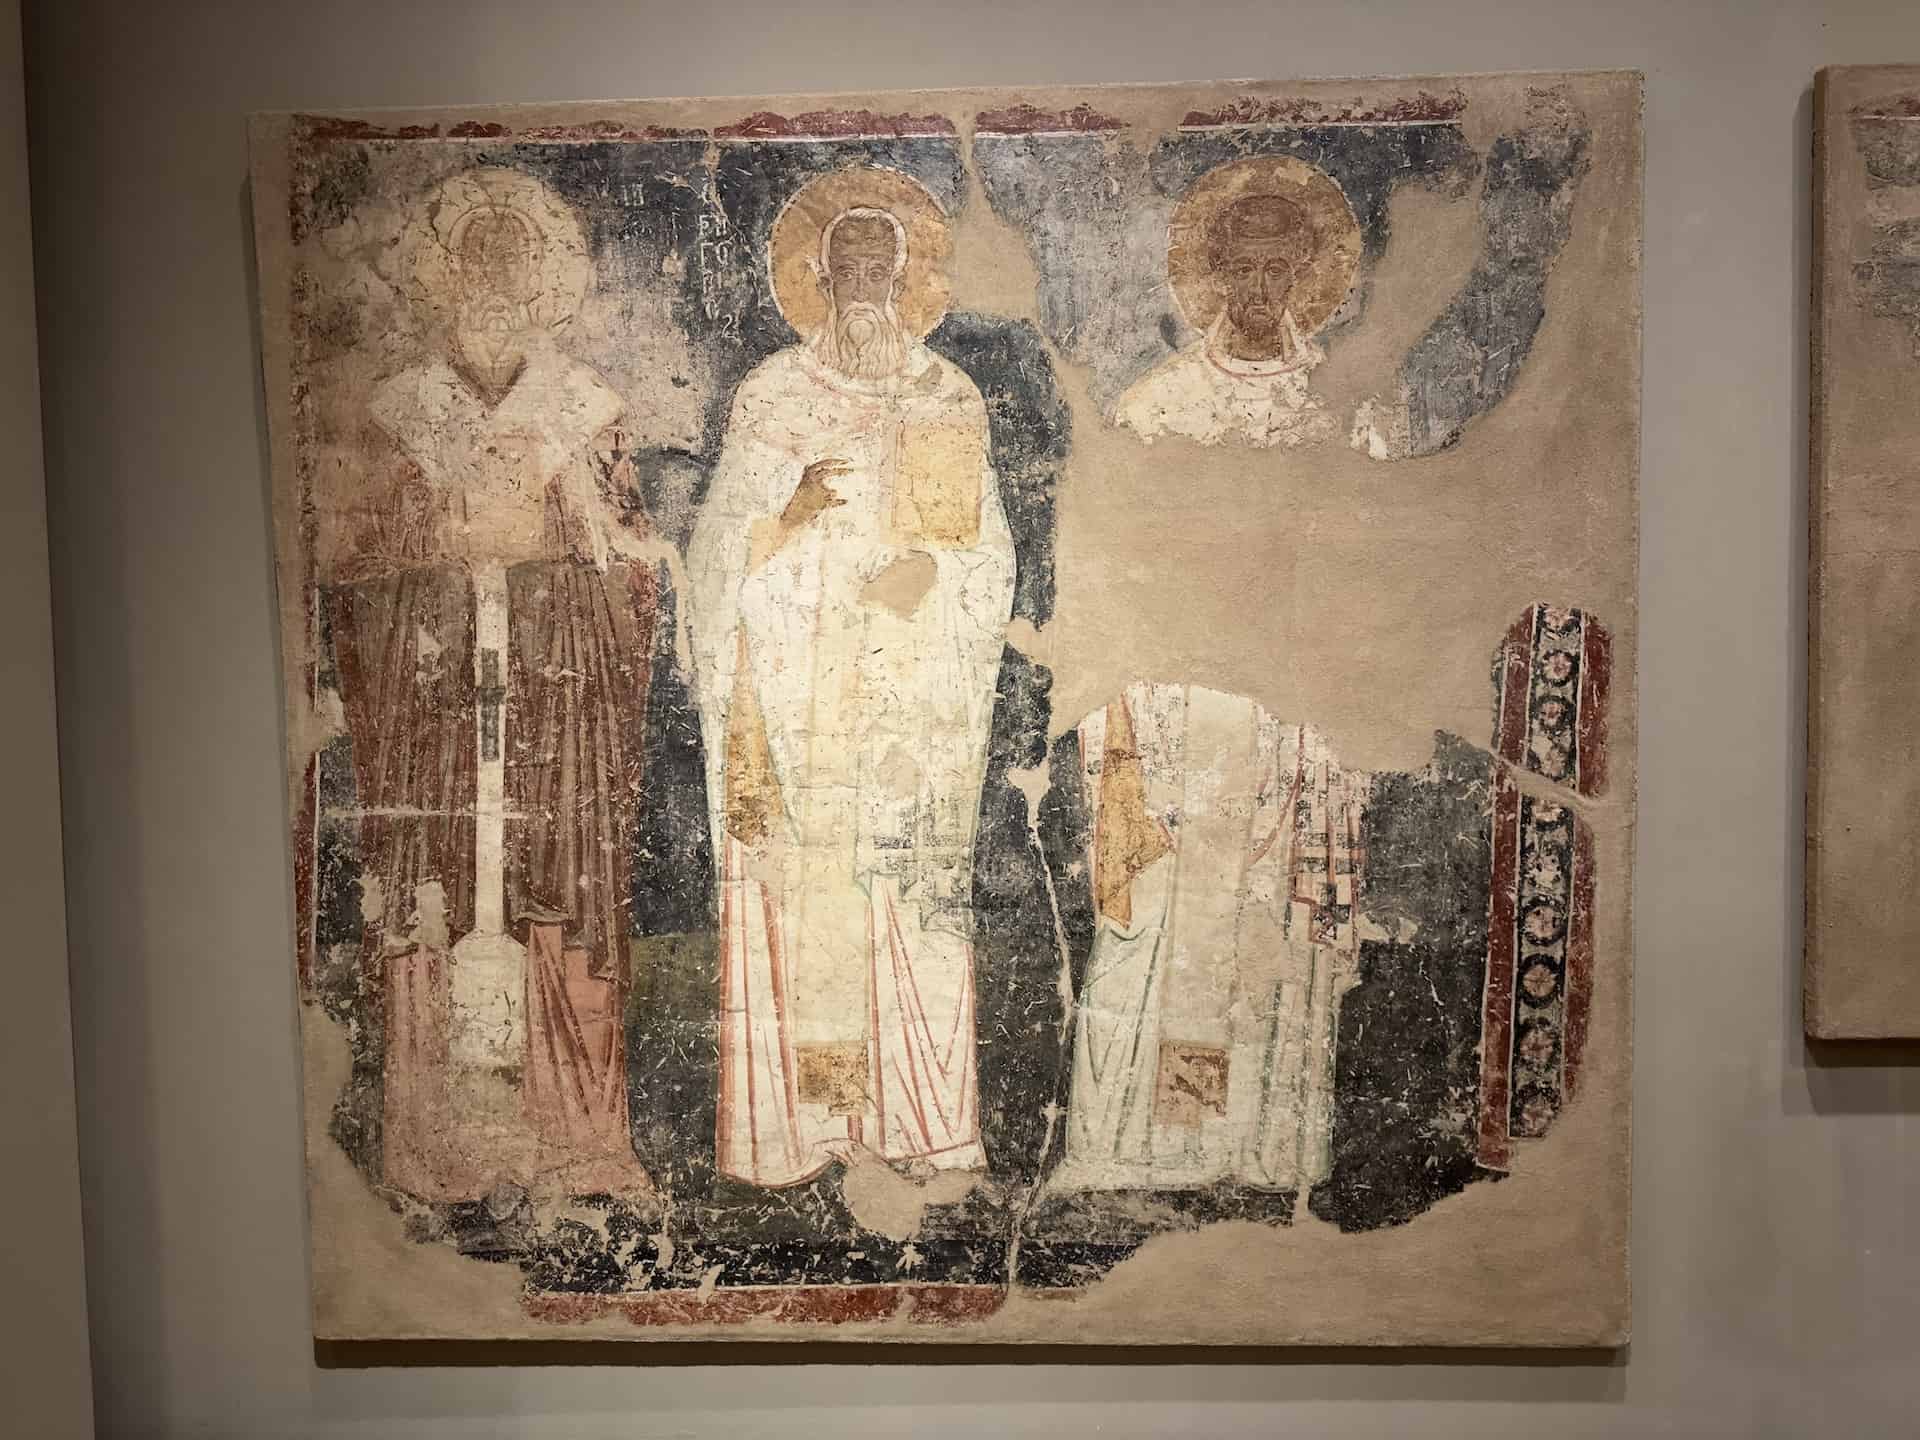 Sanctuary wall painting with Saints Ignatius Theophorus, Gregory of Nazianzus, and John Chrysostom; Oropos, Attica, Church of Saint George; 1240-1250 at the Byzantine Museum in Athens, Greece